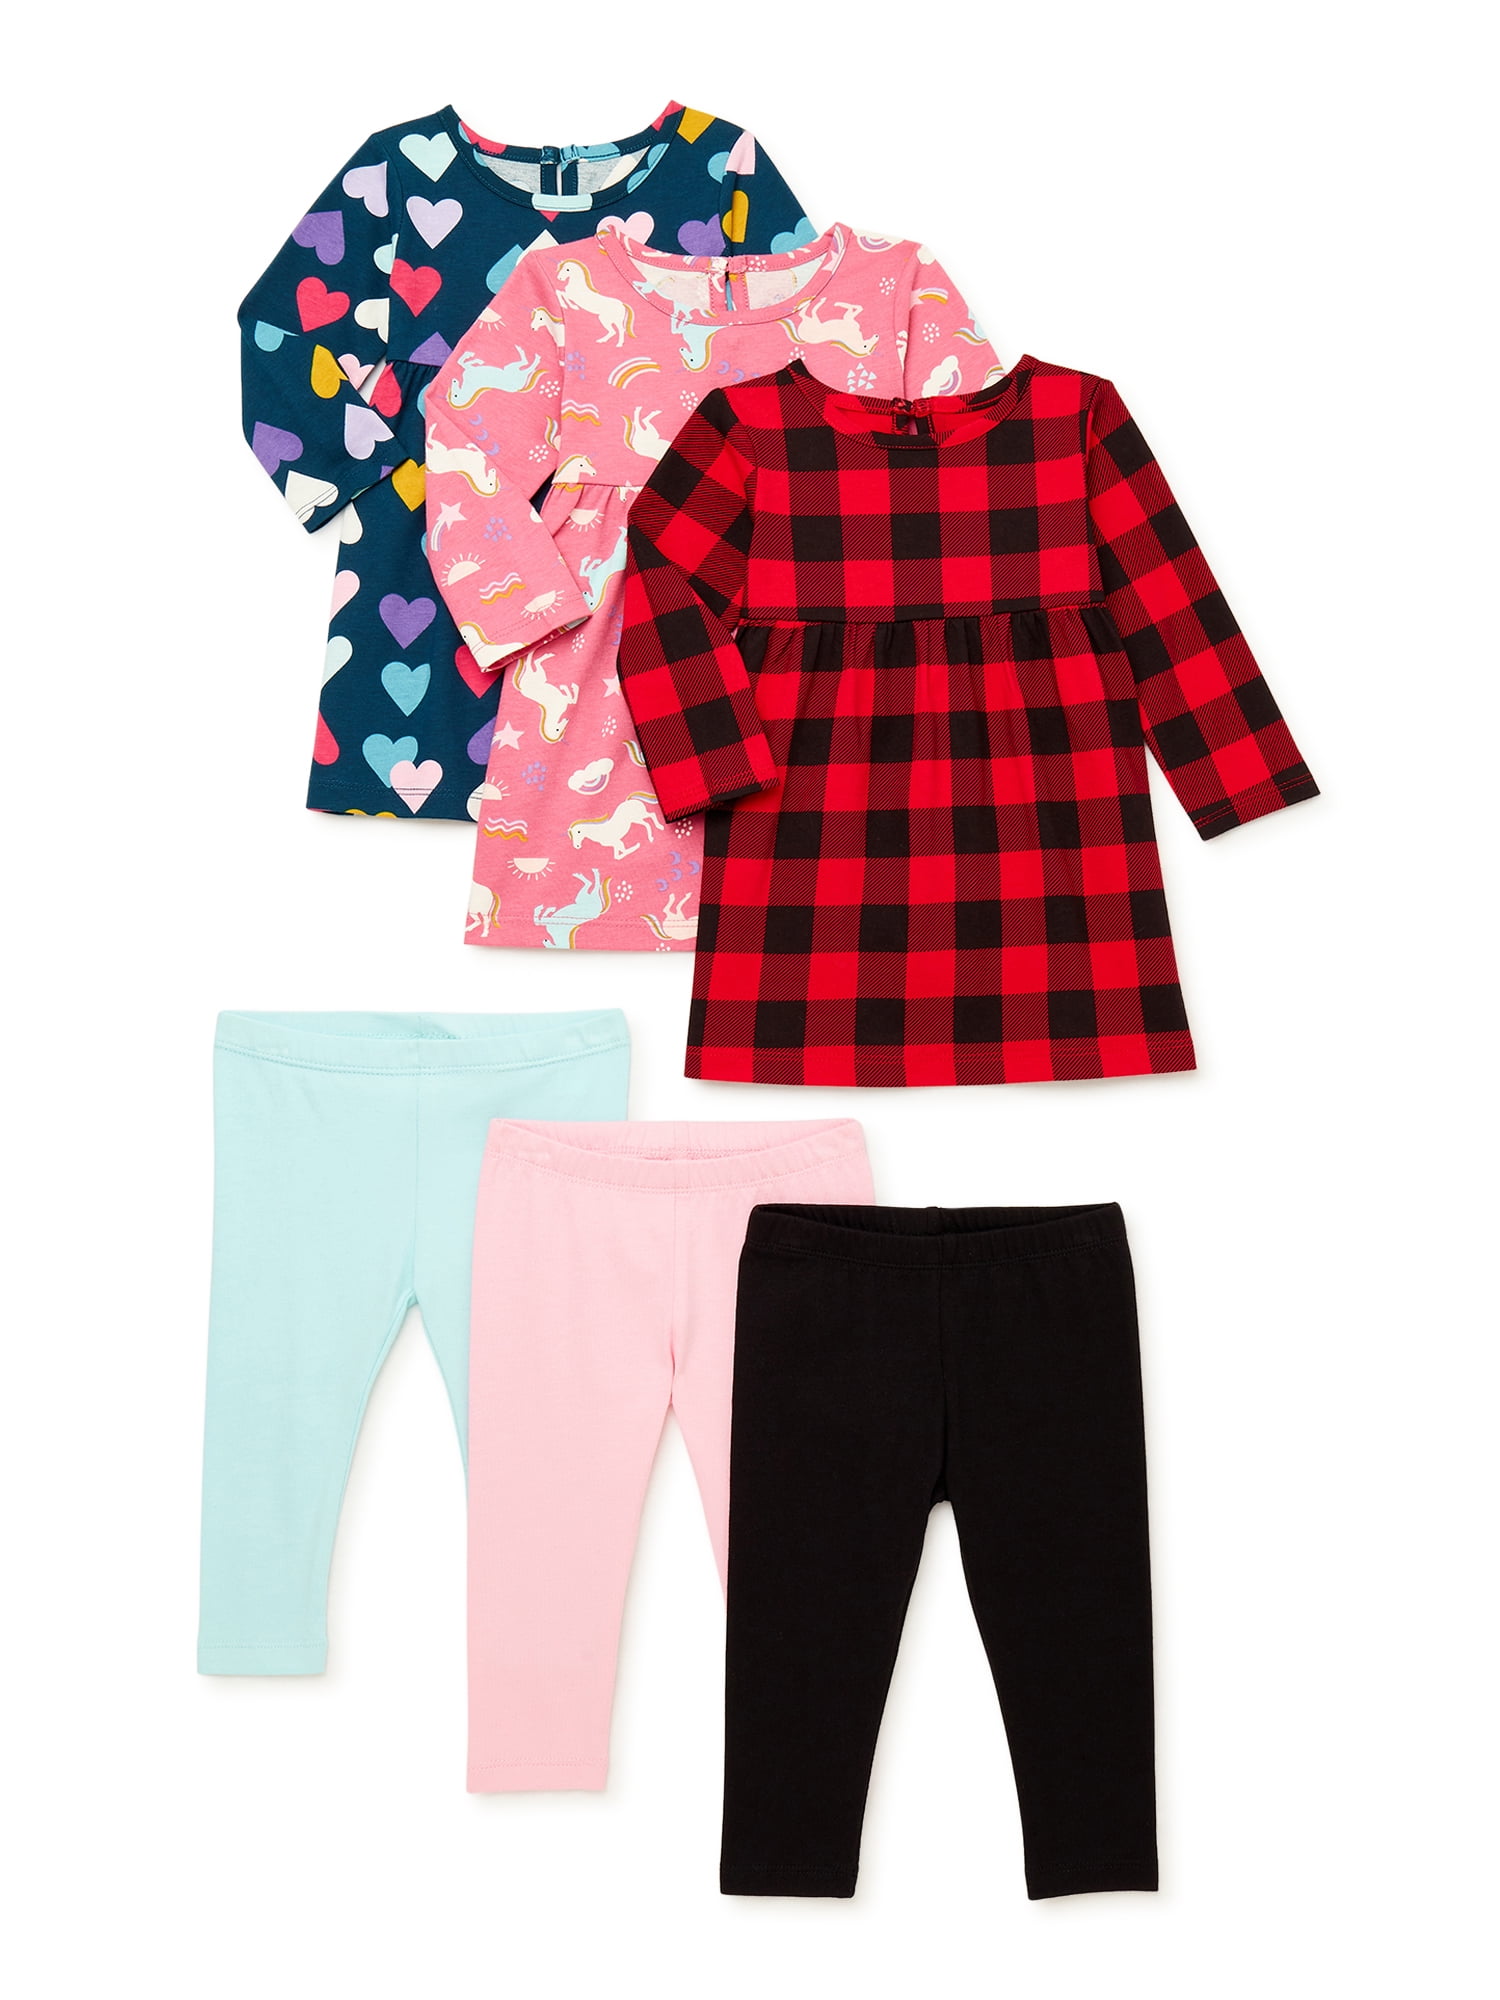 Baby girls pink APPLE BOTTOMS top & leggings outfit 0-3 3-6 6-9 12 18 24 months 